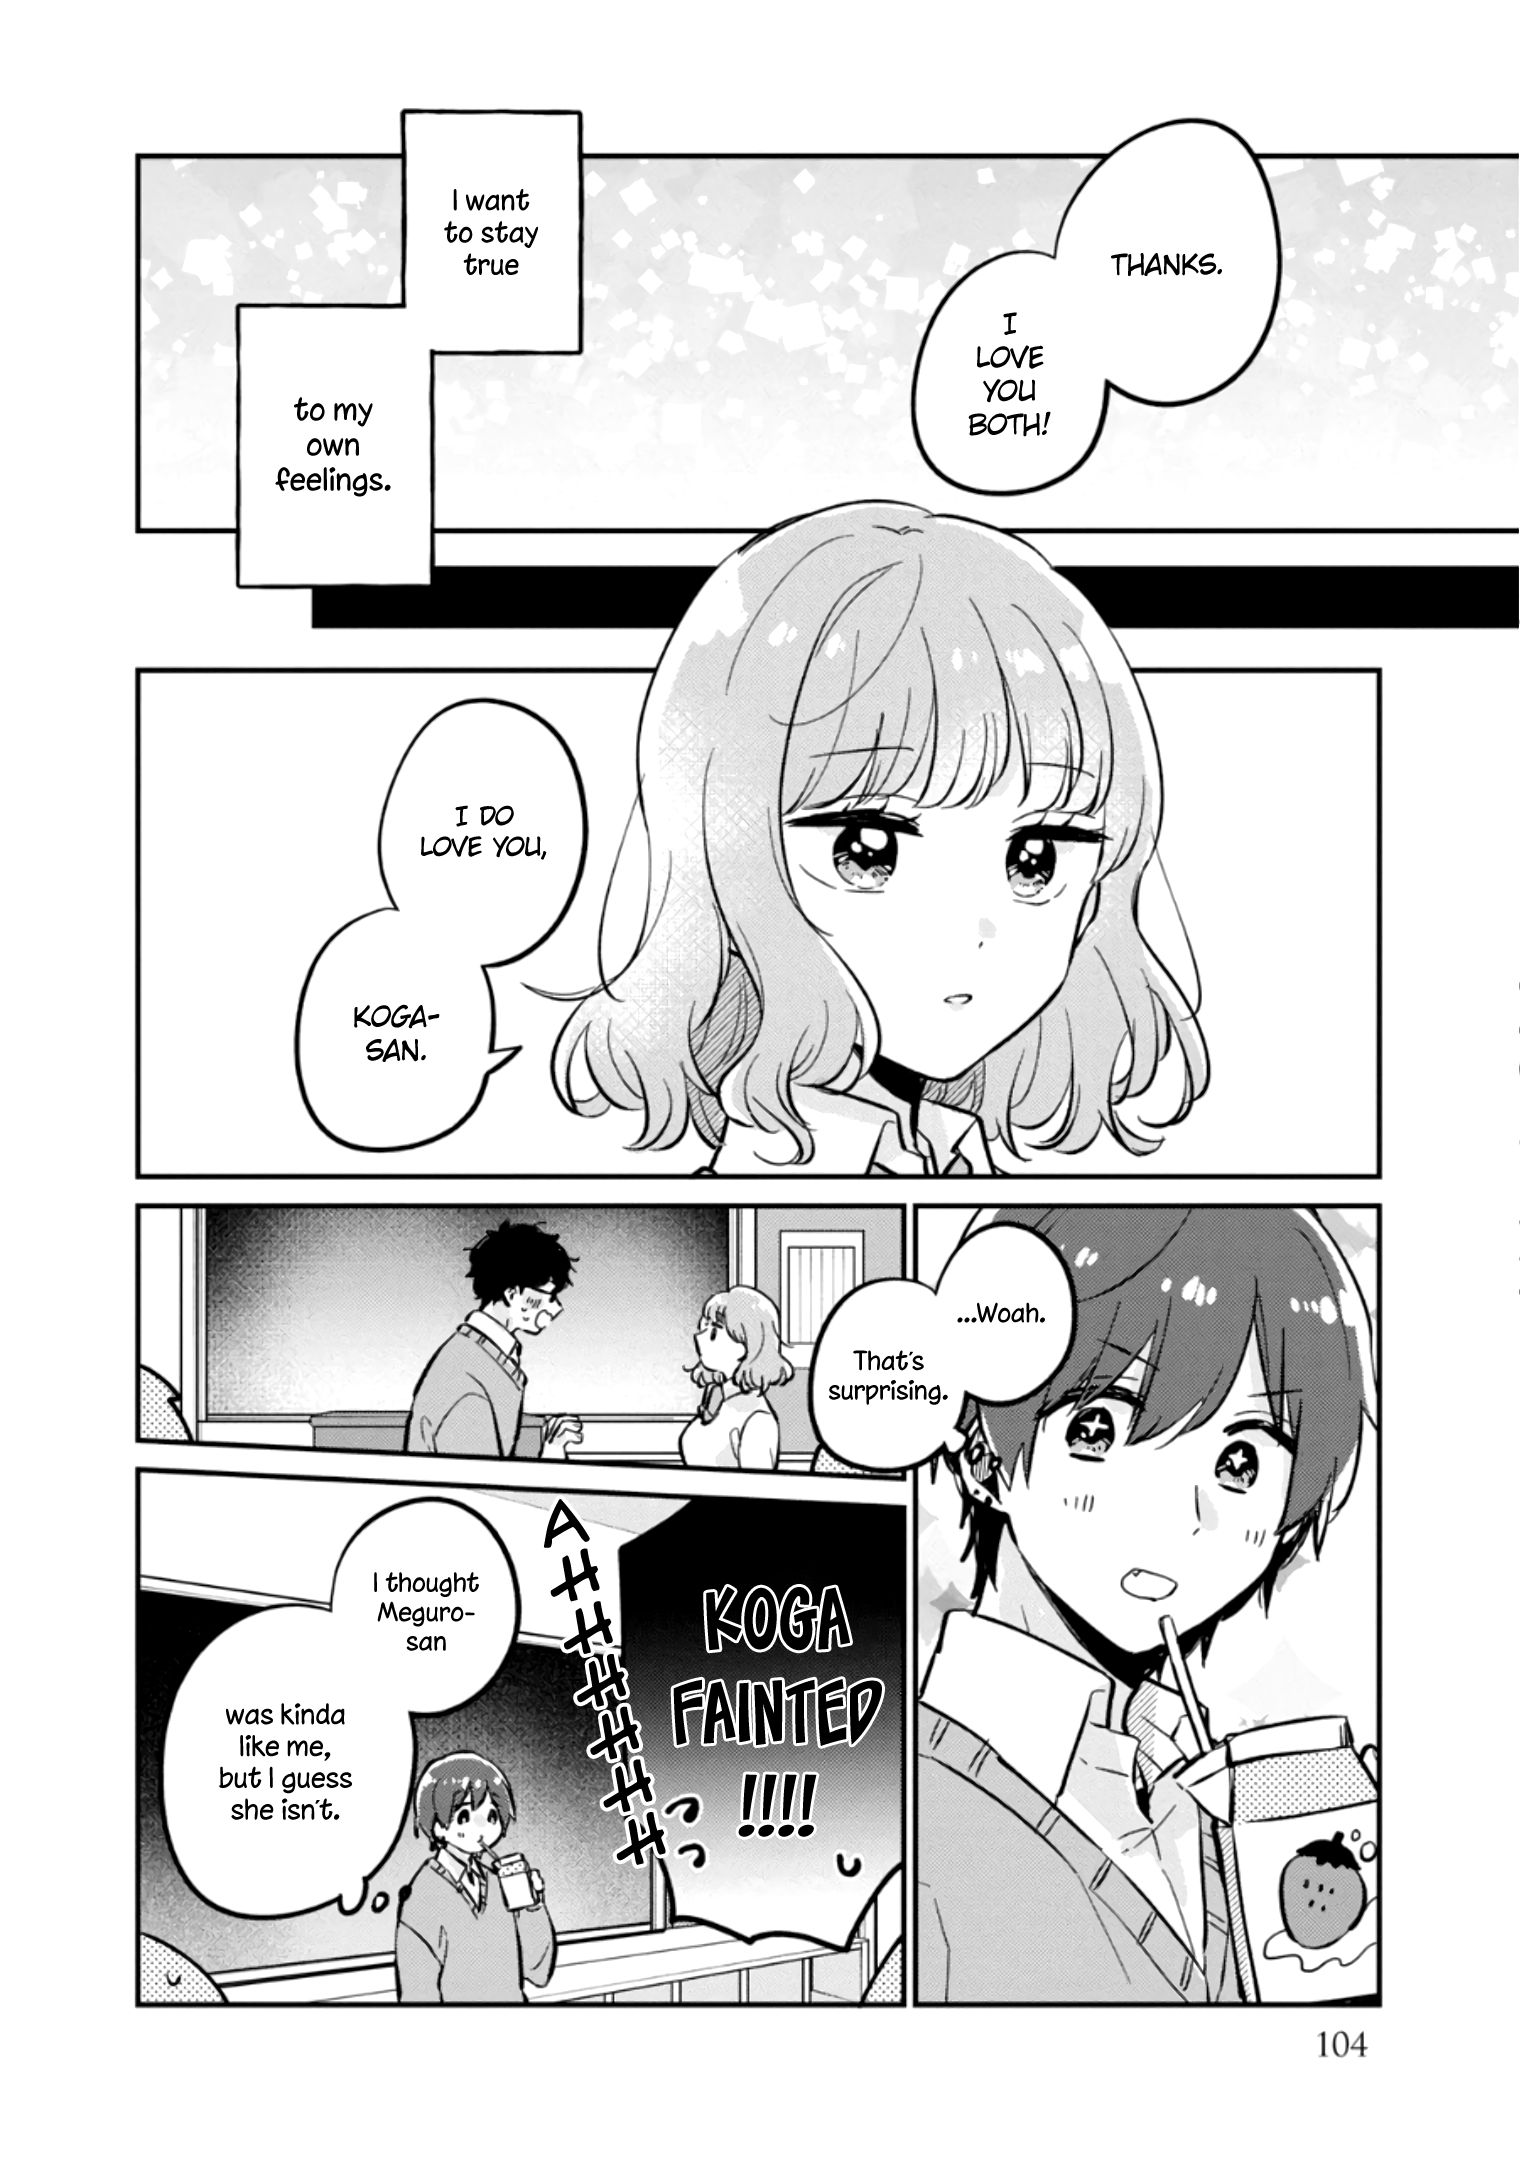 It's Not Meguro-san's First Time chapter 38.5 page 11